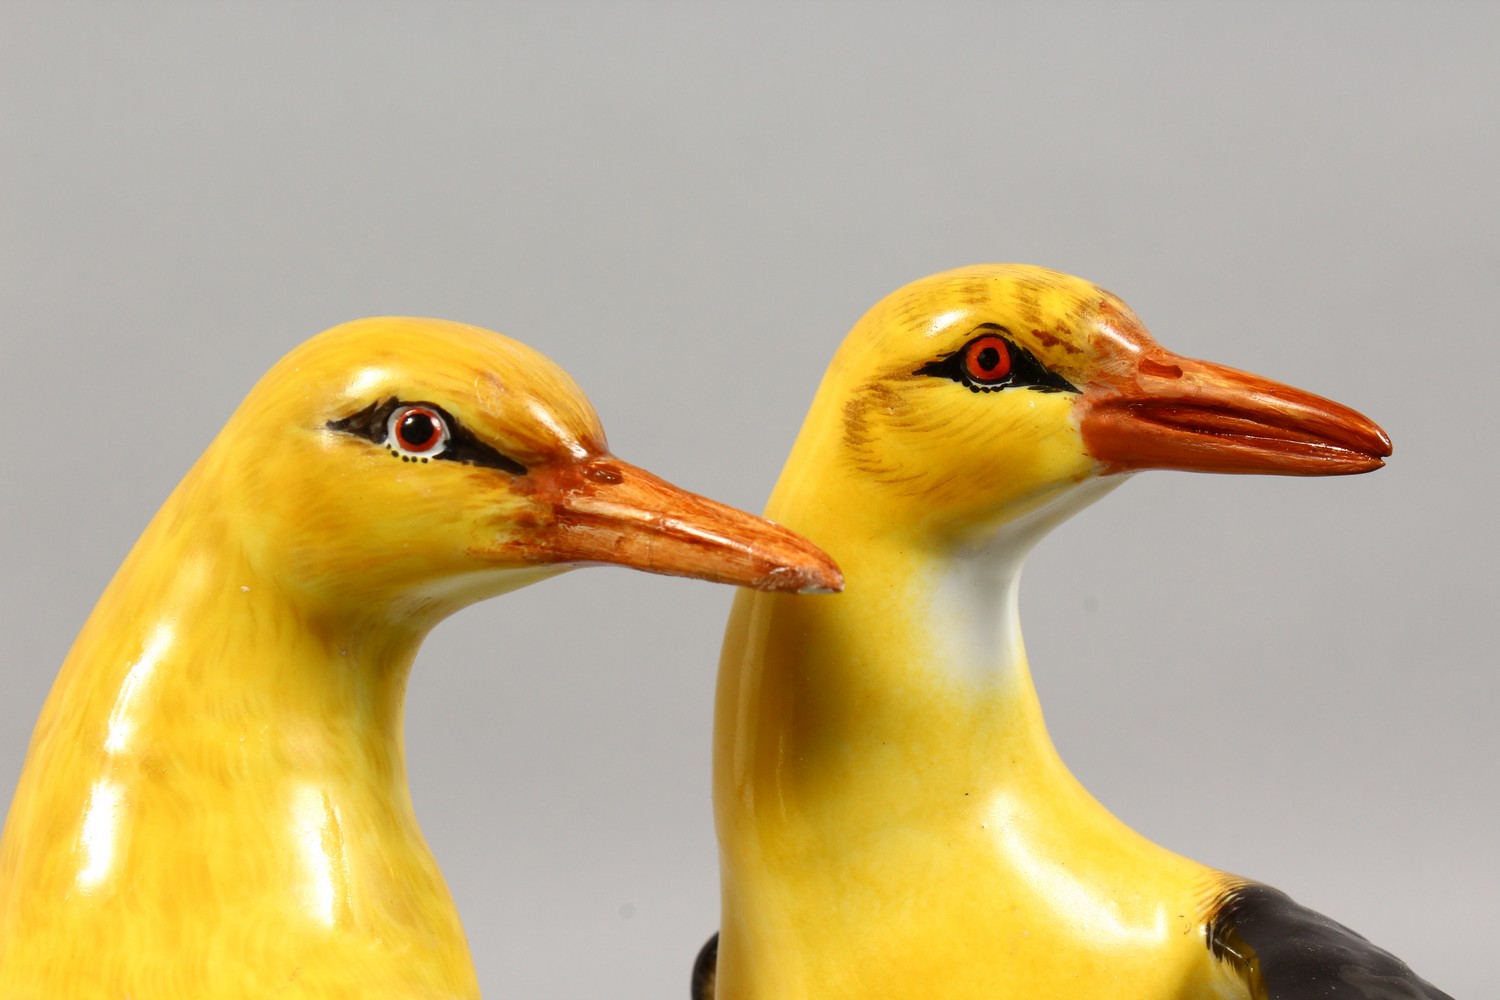 A VERY GOOD PAIR OF 19TH CENTURY MEISSEN BIRDS "GOLDEN ORIOLES" standing on encrusted tree stumps. - Image 2 of 18